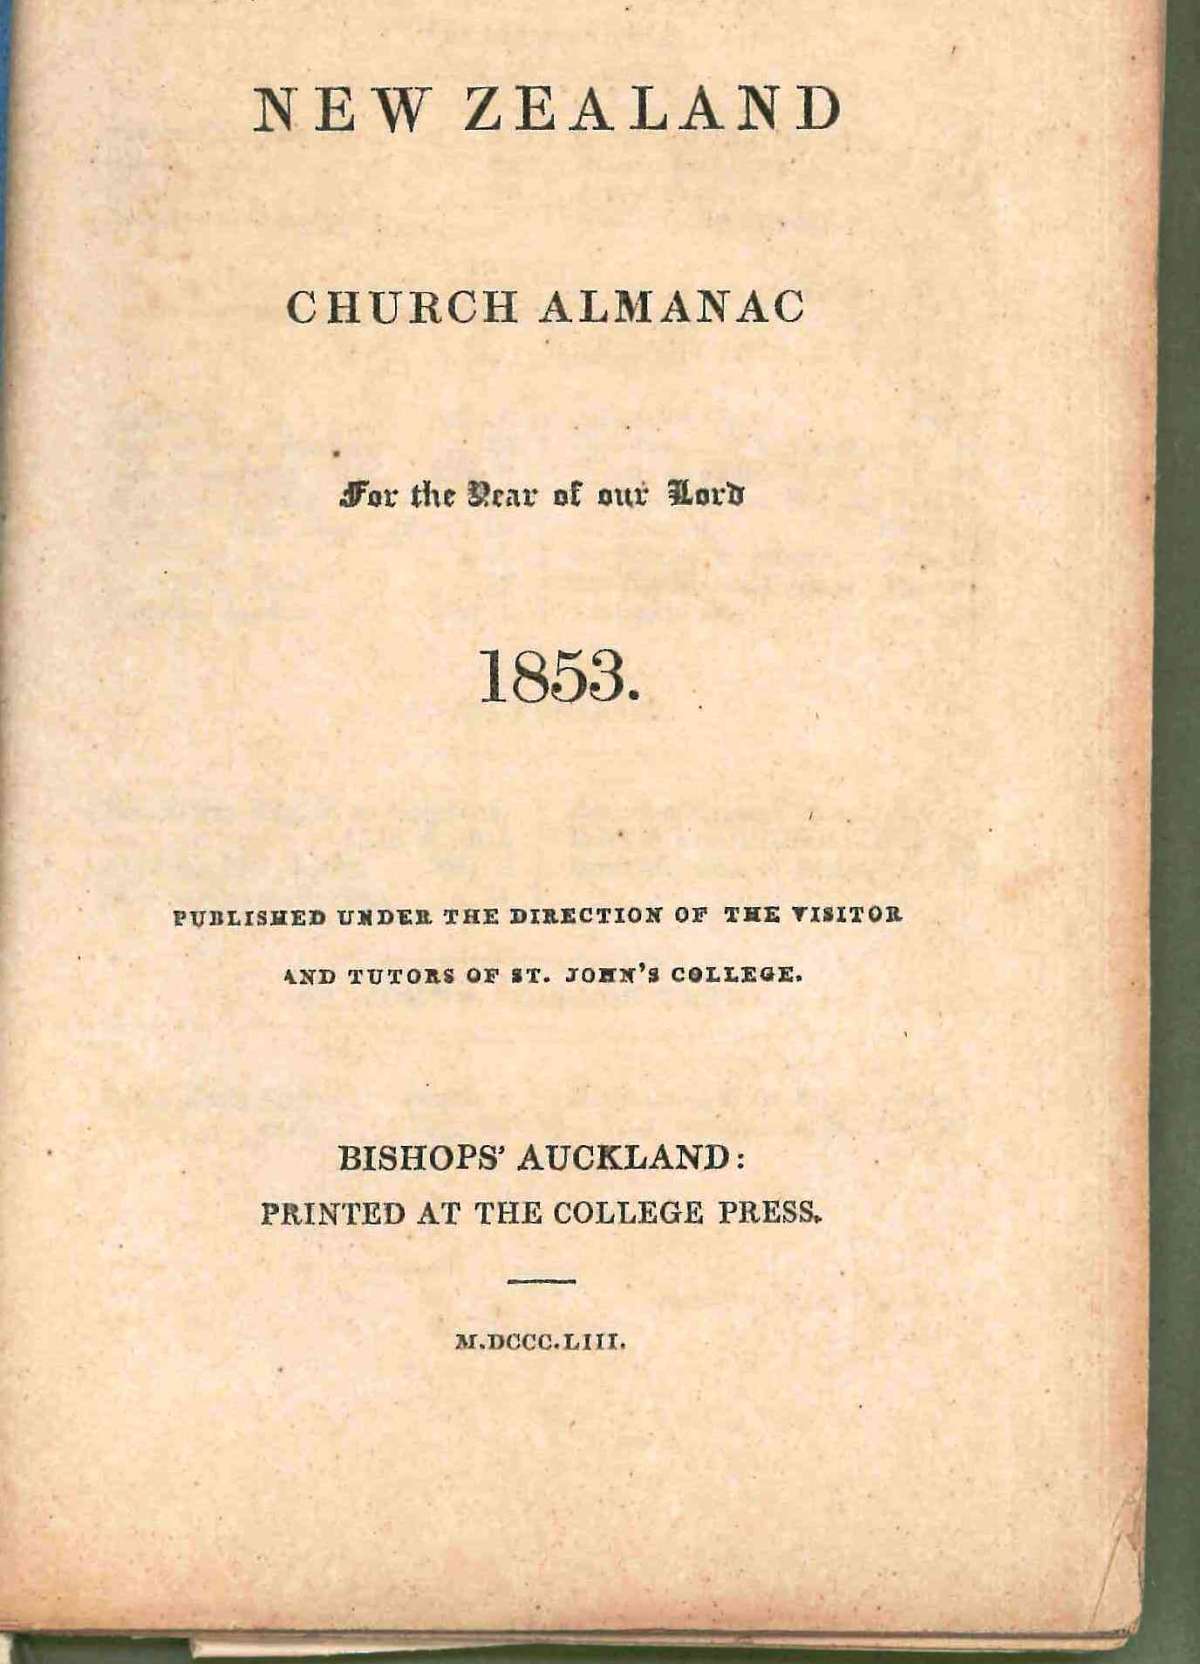 Front page of the Church Alamanc.